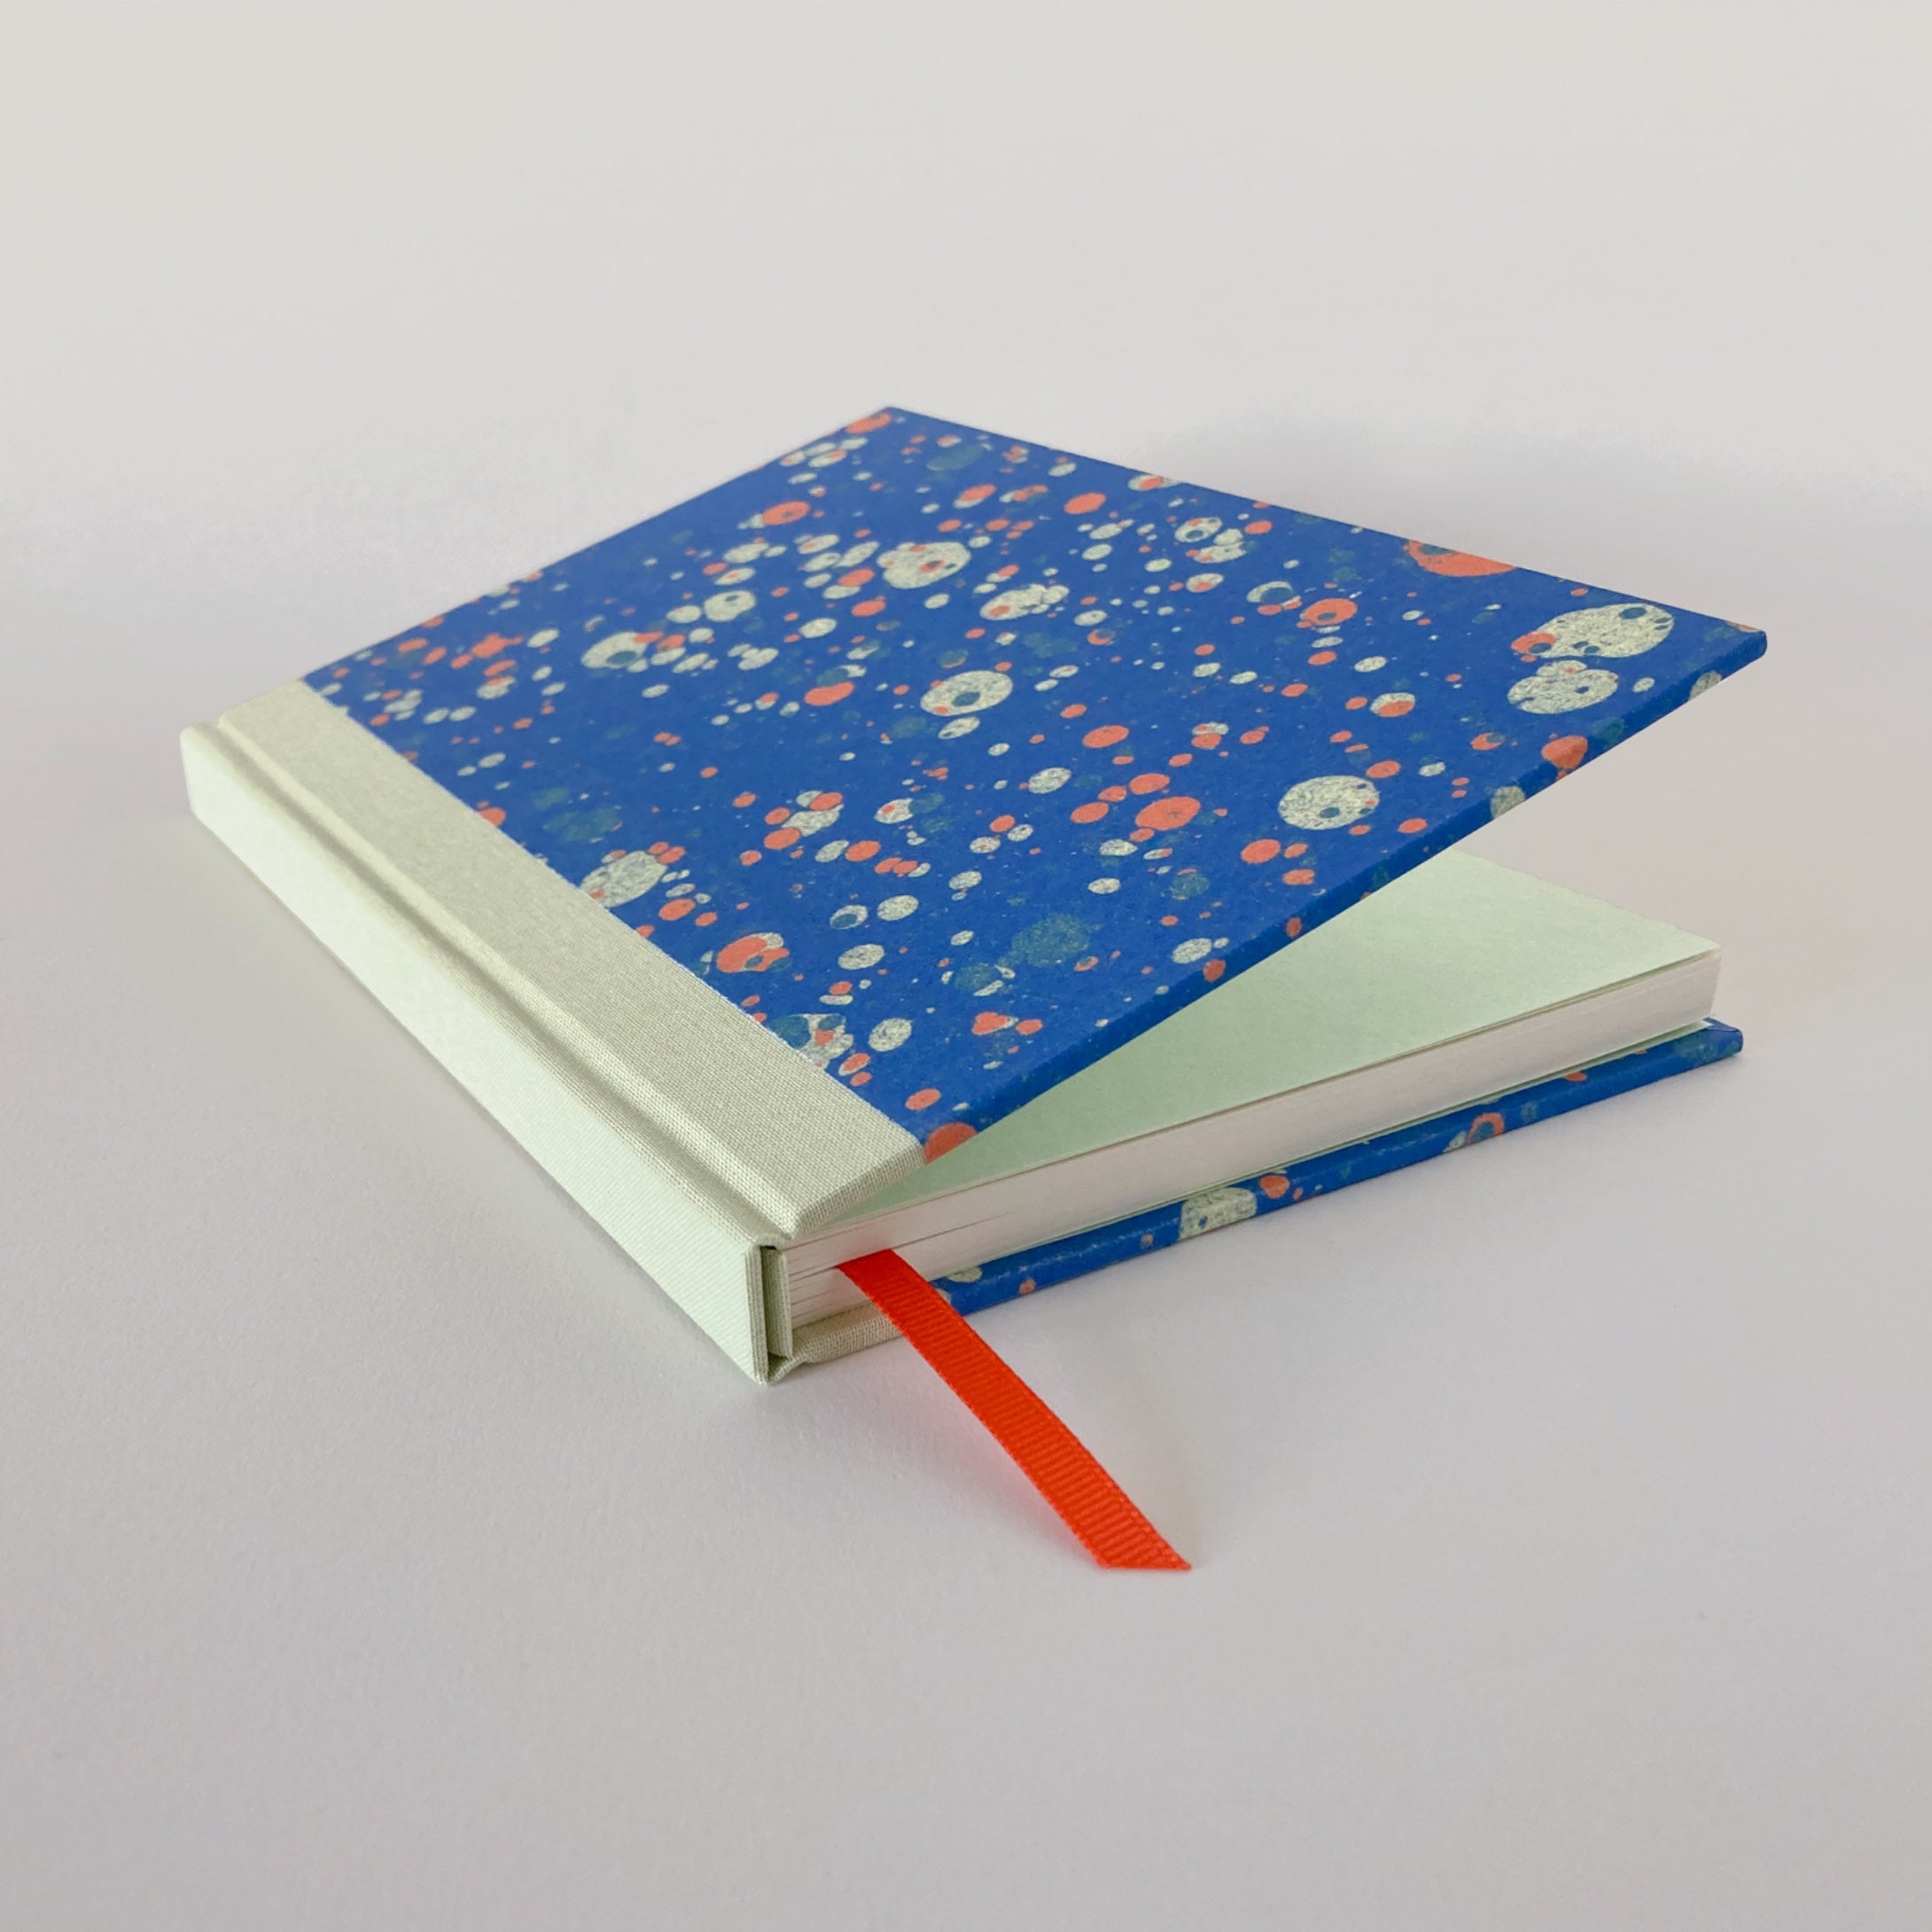 Blue marble hardback notebook partially open, revealing mint end pages.